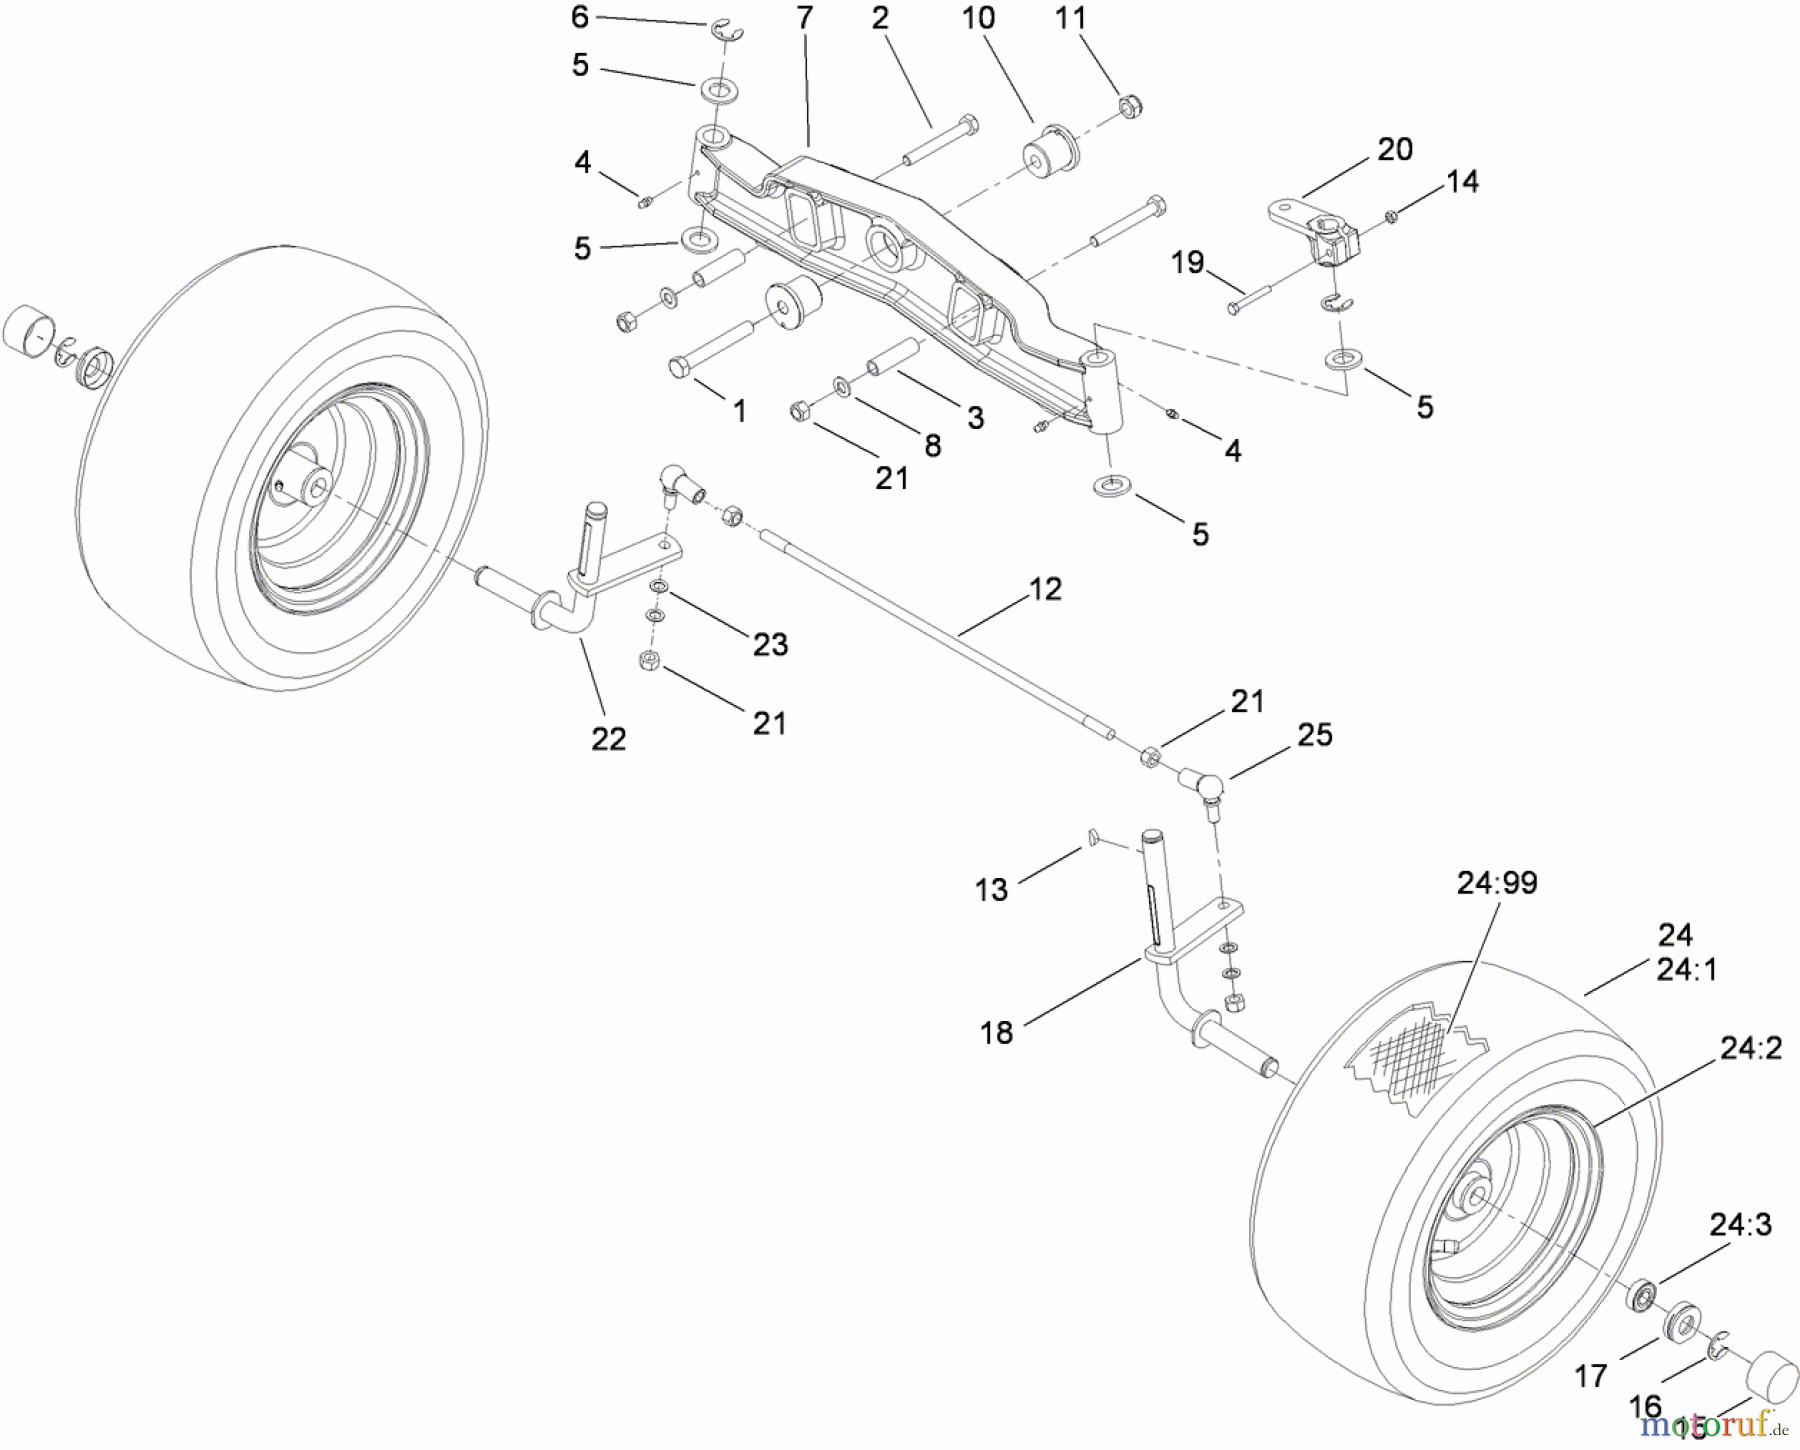  Toro Neu Mowers, Lawn & Garden Tractor Seite 1 74582 (DH 210) - Toro DH 210 Lawn Tractor, 2010 (310000001-310999999) FRONT AXLE ASSEMBLY